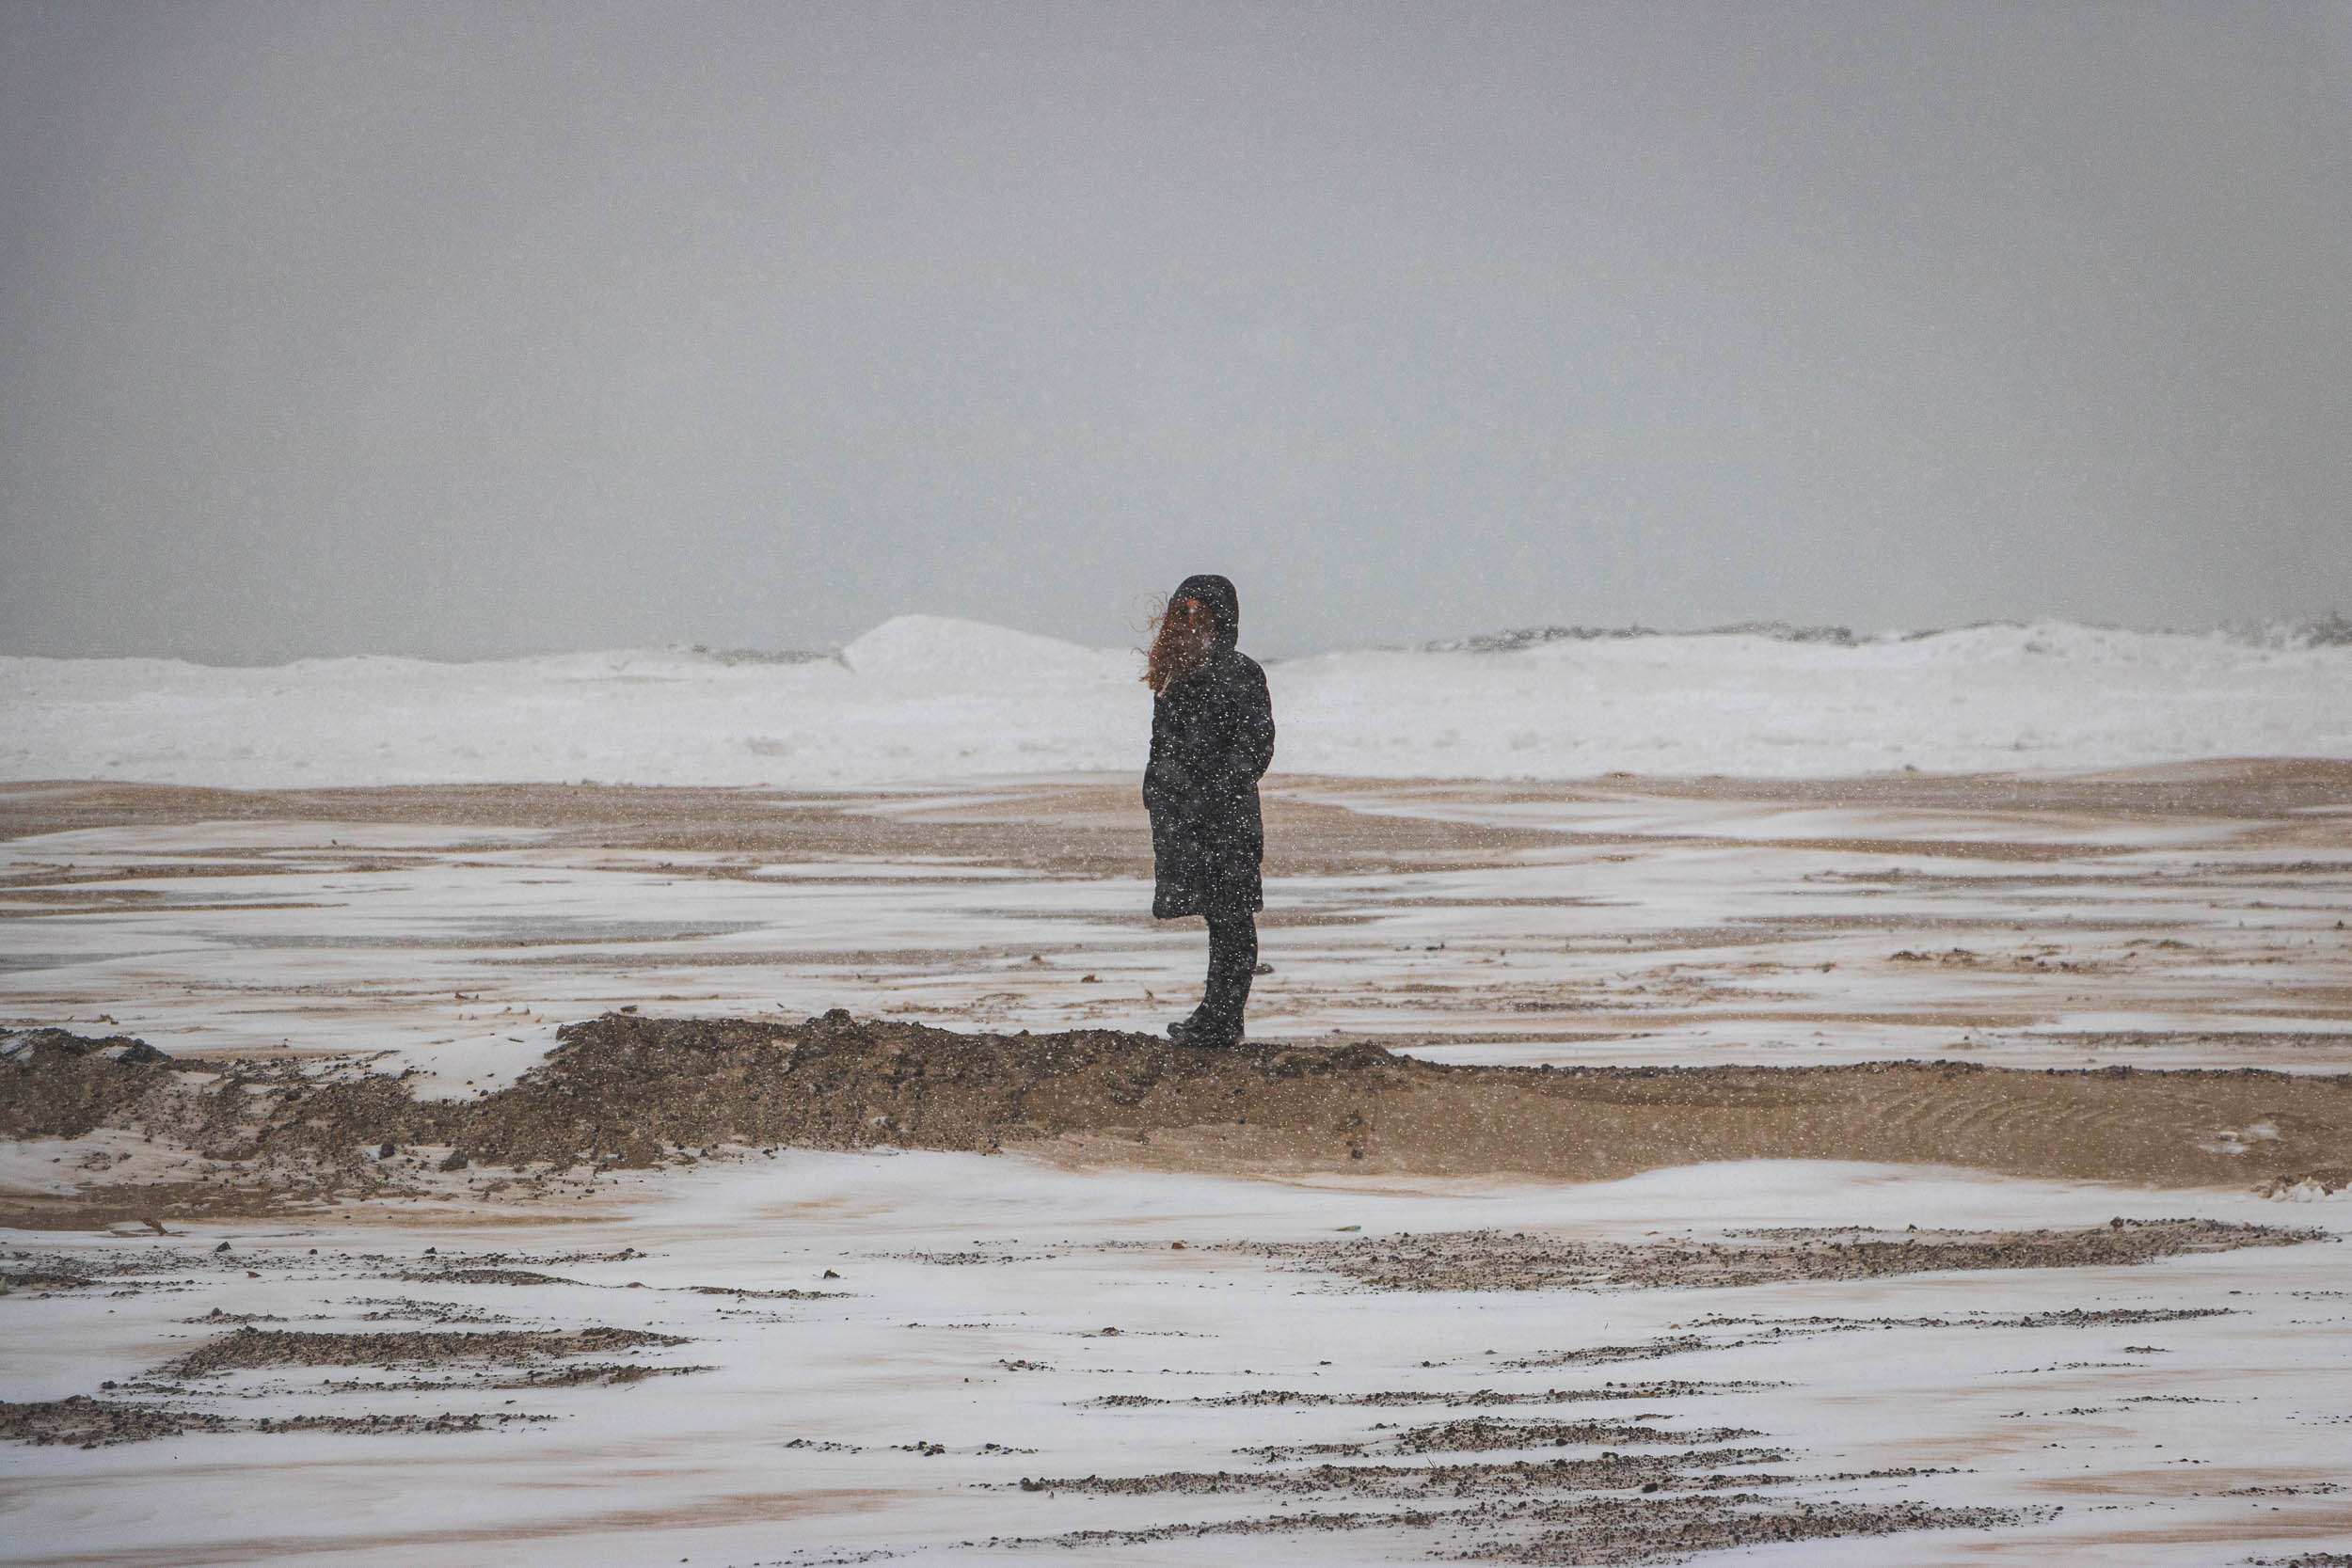 Jenna standing in a blizzard at the shore of Lake Michigan in Chicago